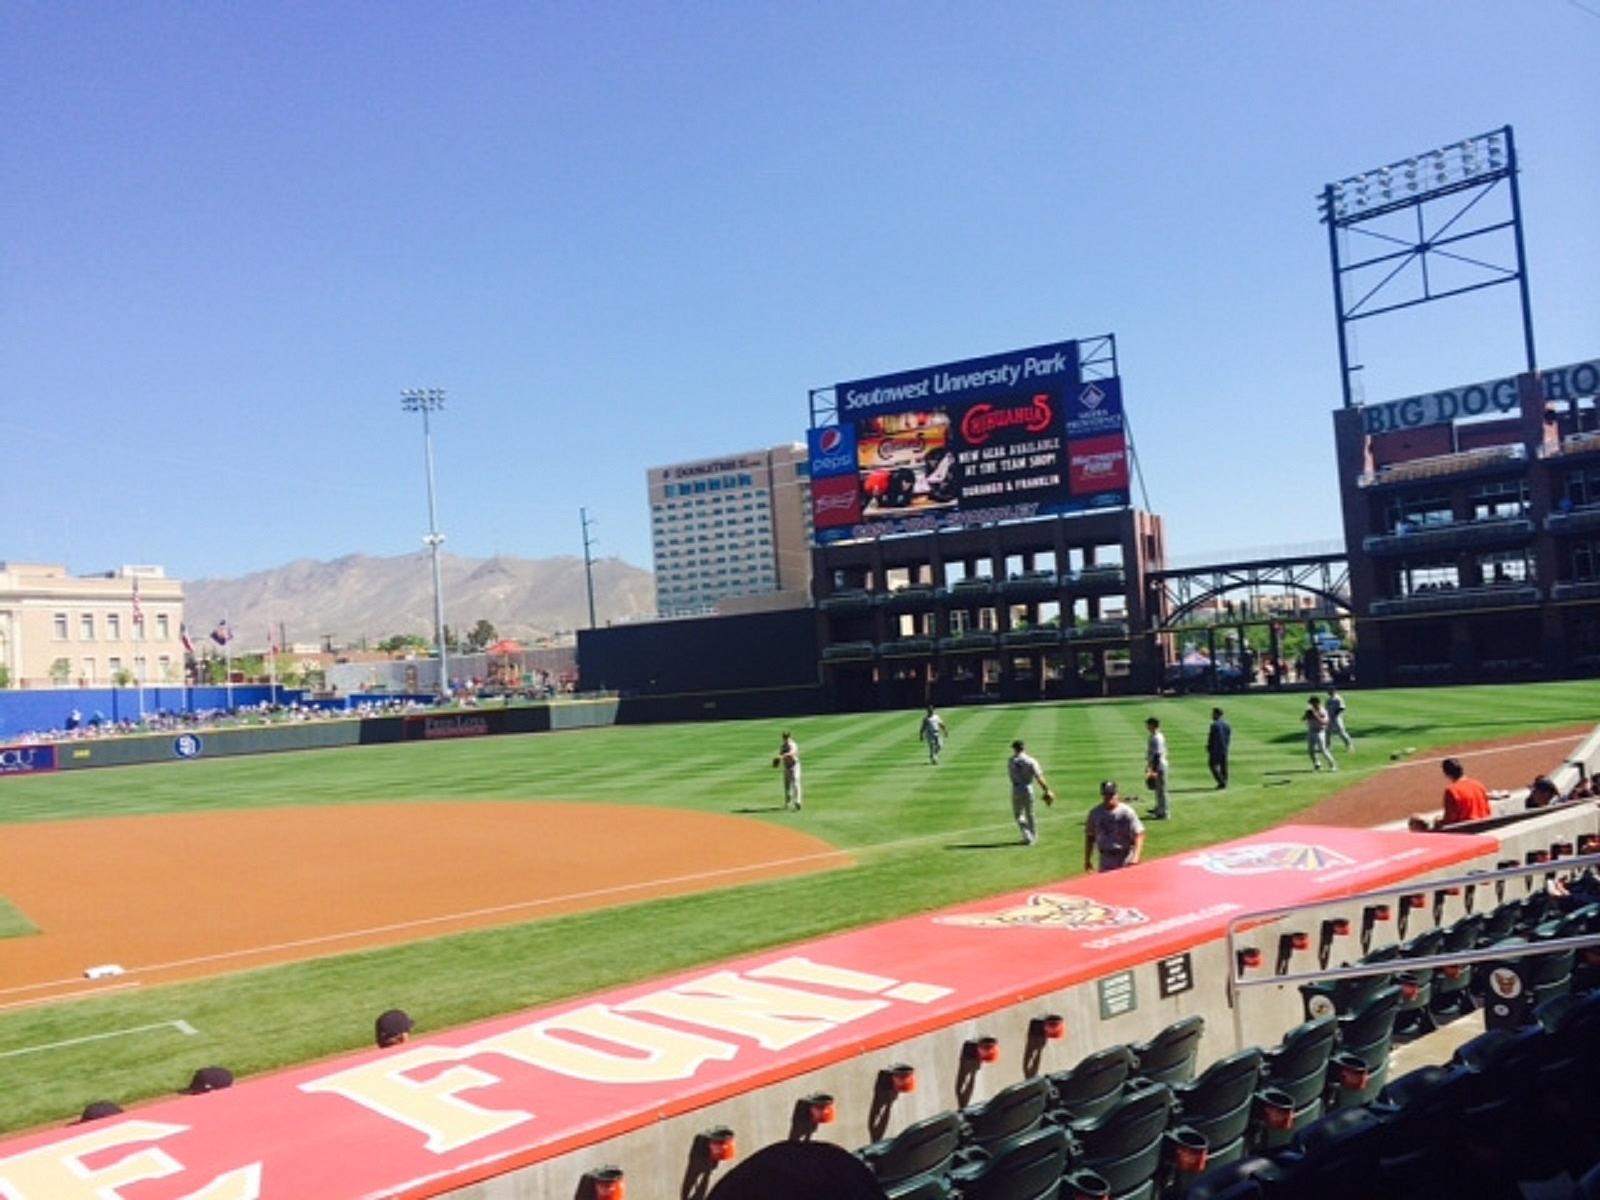 Thousands of fans expected at El Paso Chihuahua's games despite